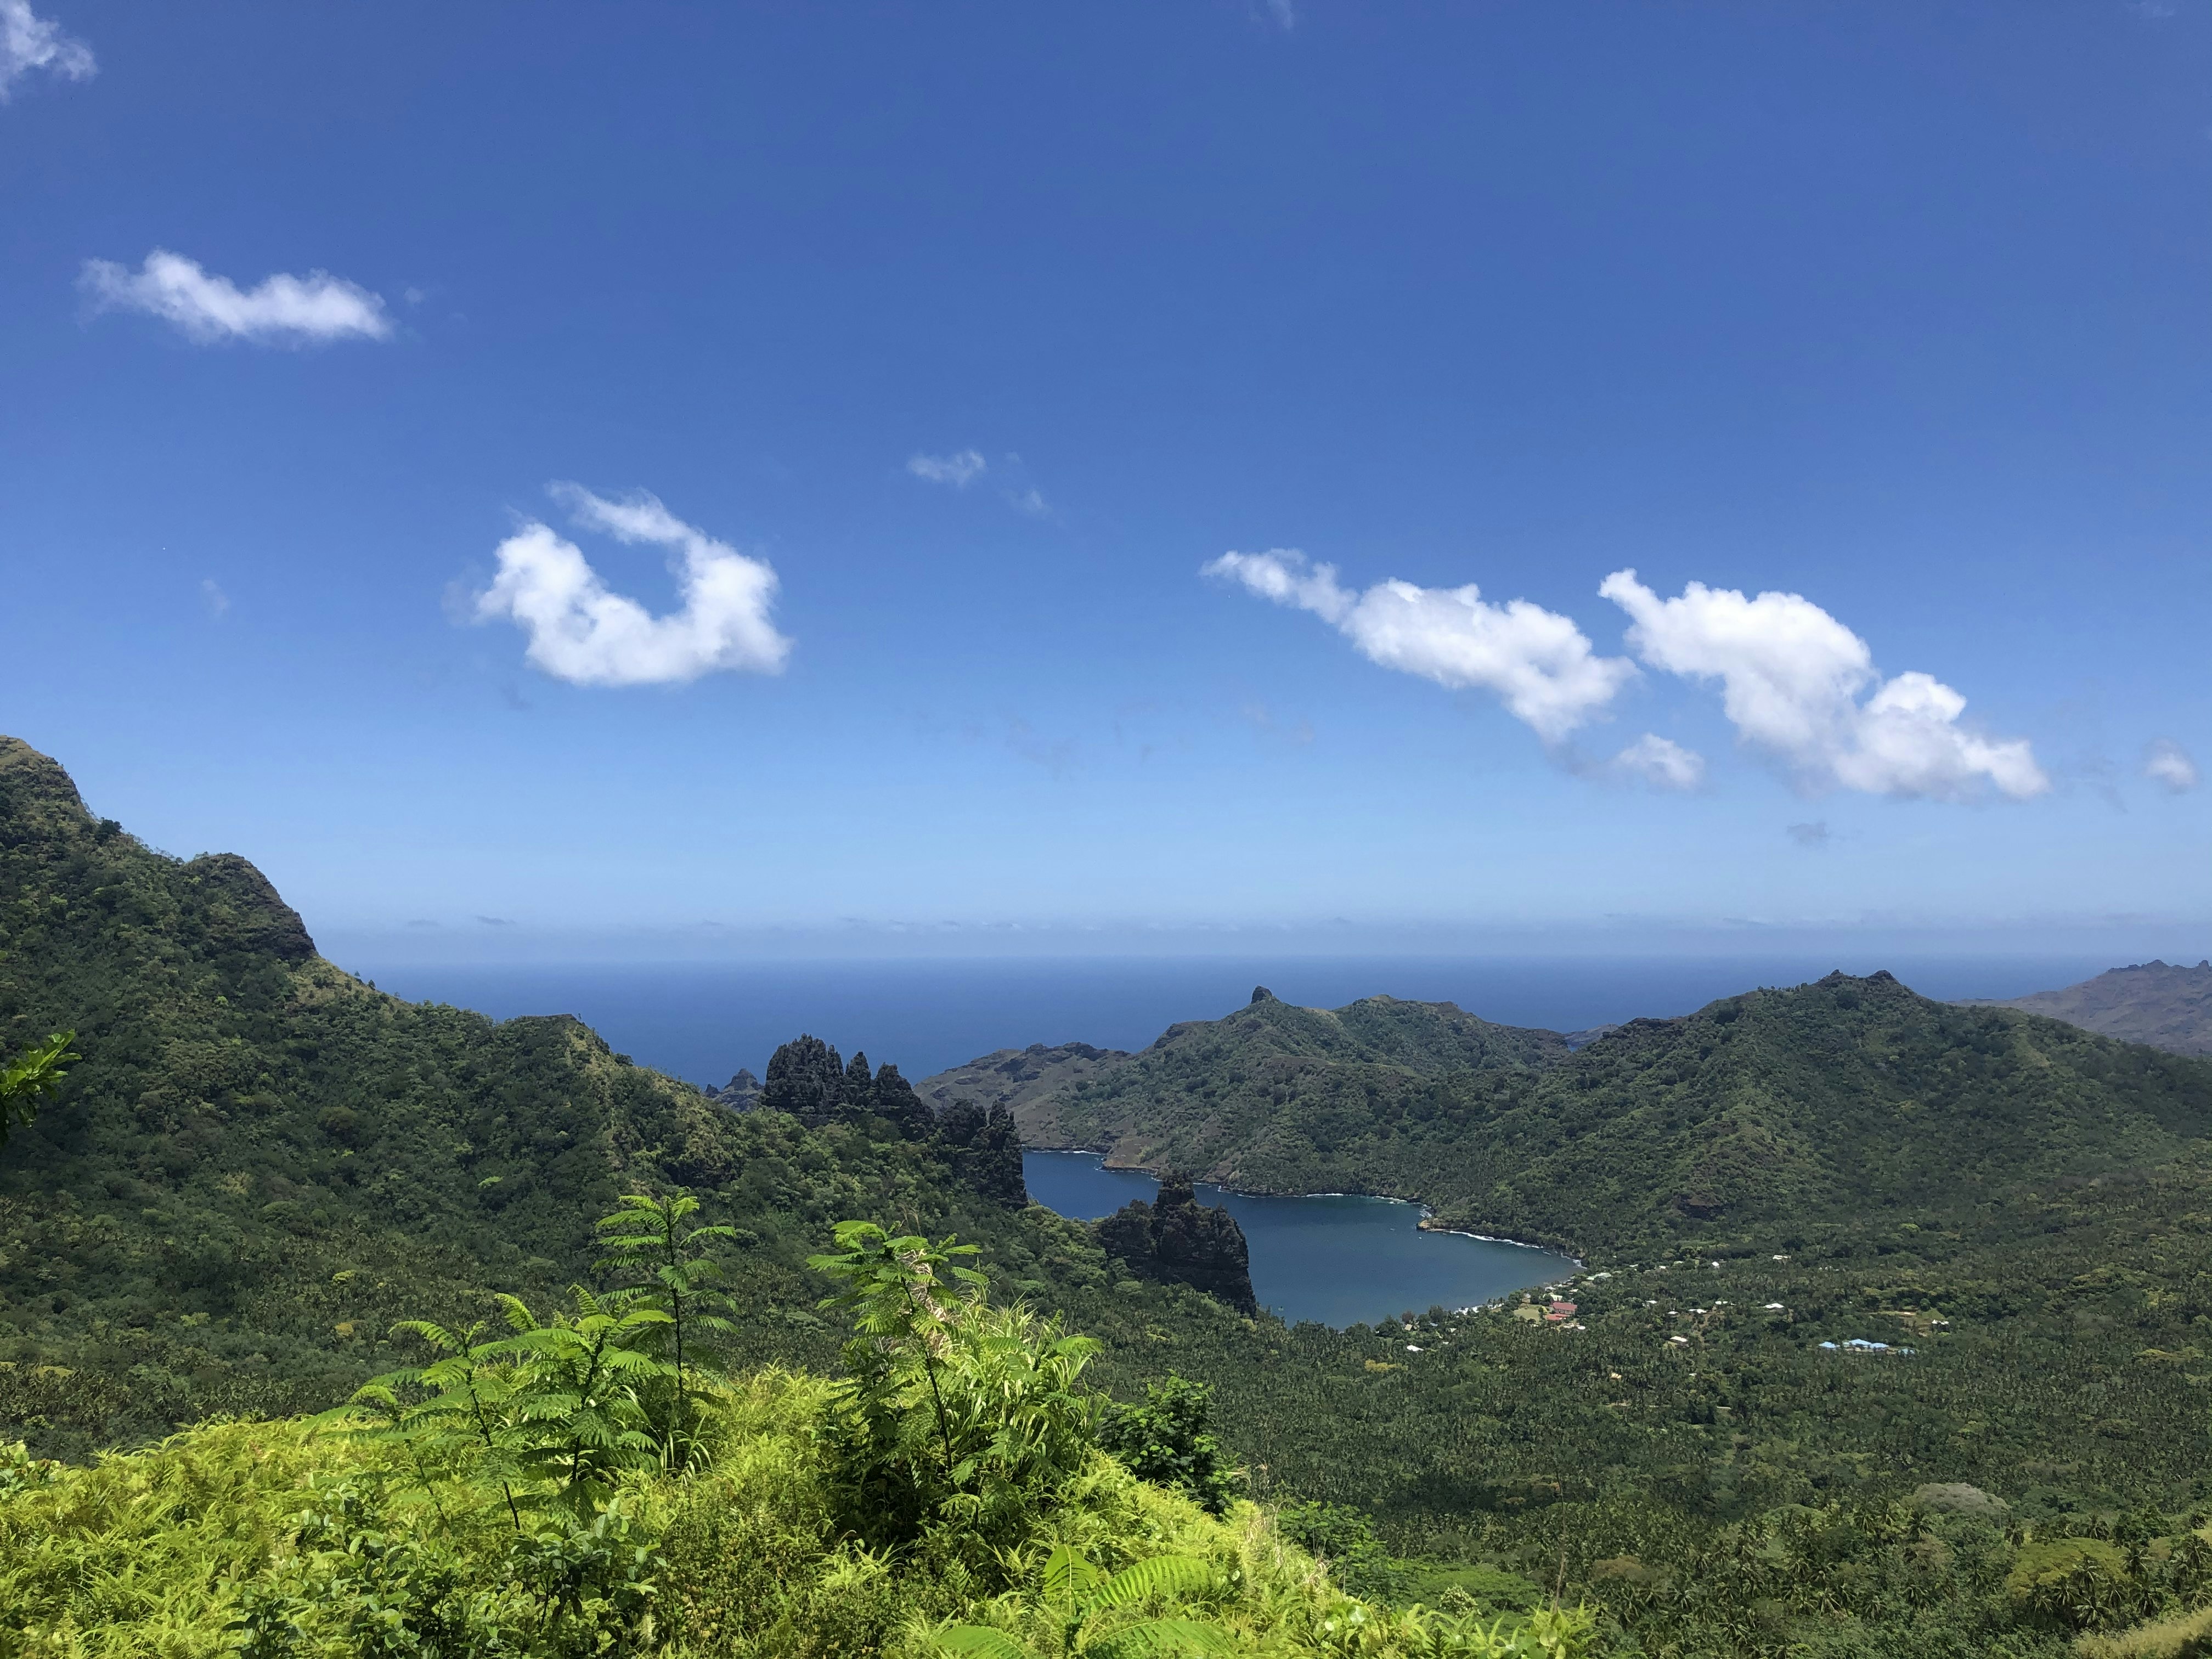 An ariel view of the forests and coastline on Nuku Hiva